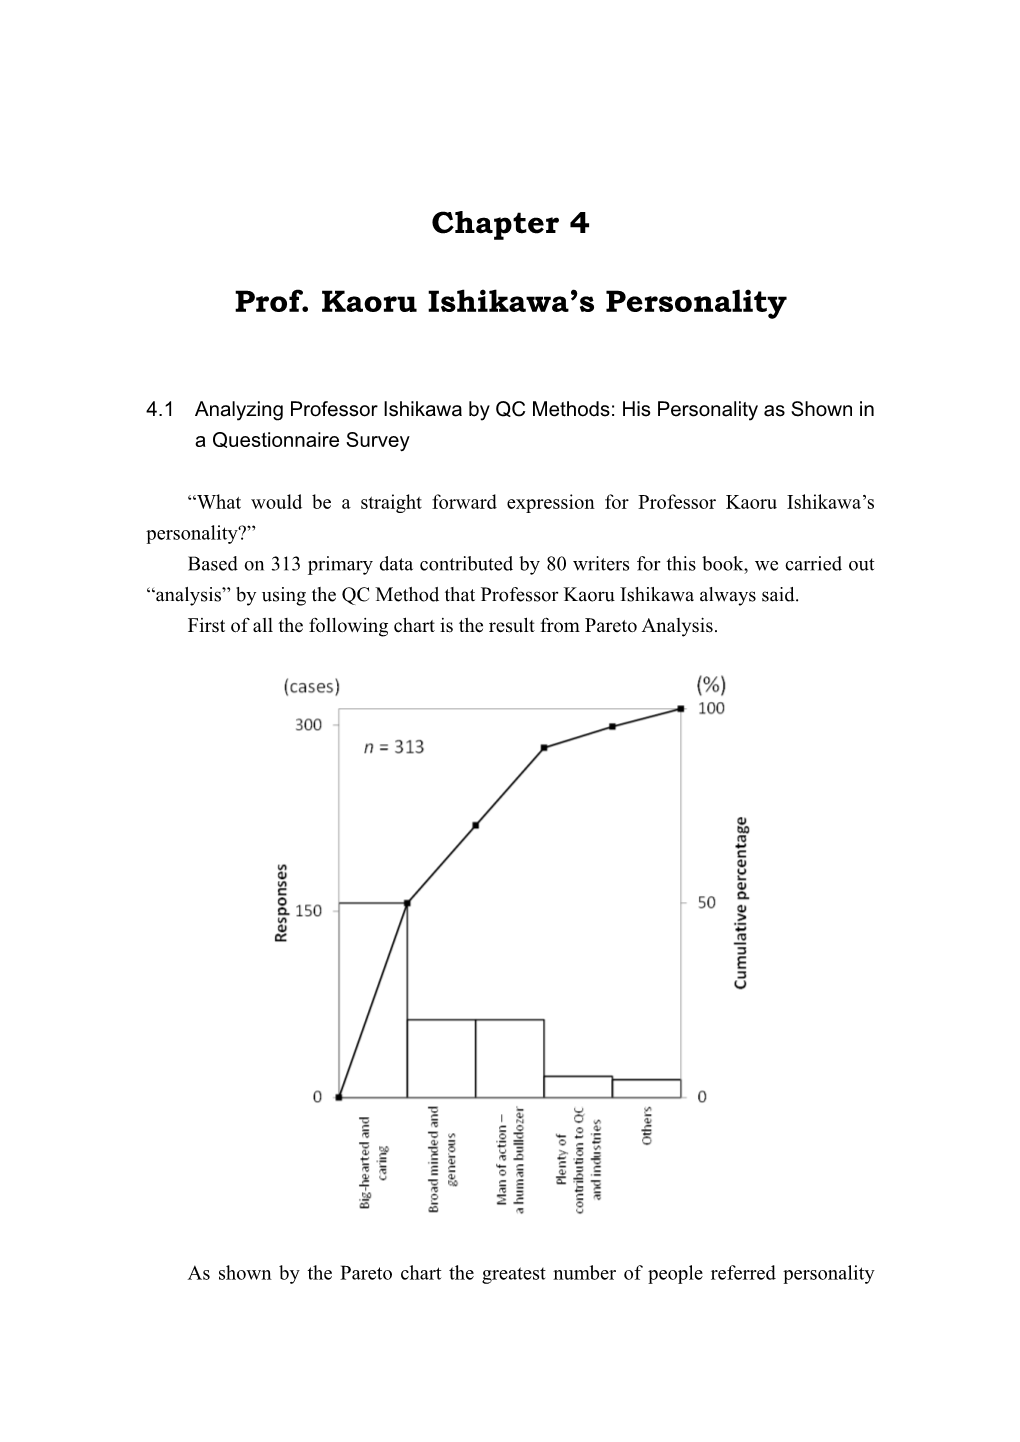 Chapter 4 Prof. Kaoru Ishikawa's Personality Have Analyzed by the Quantification Method III Utilizing the Writers’ Data and Comments As Category